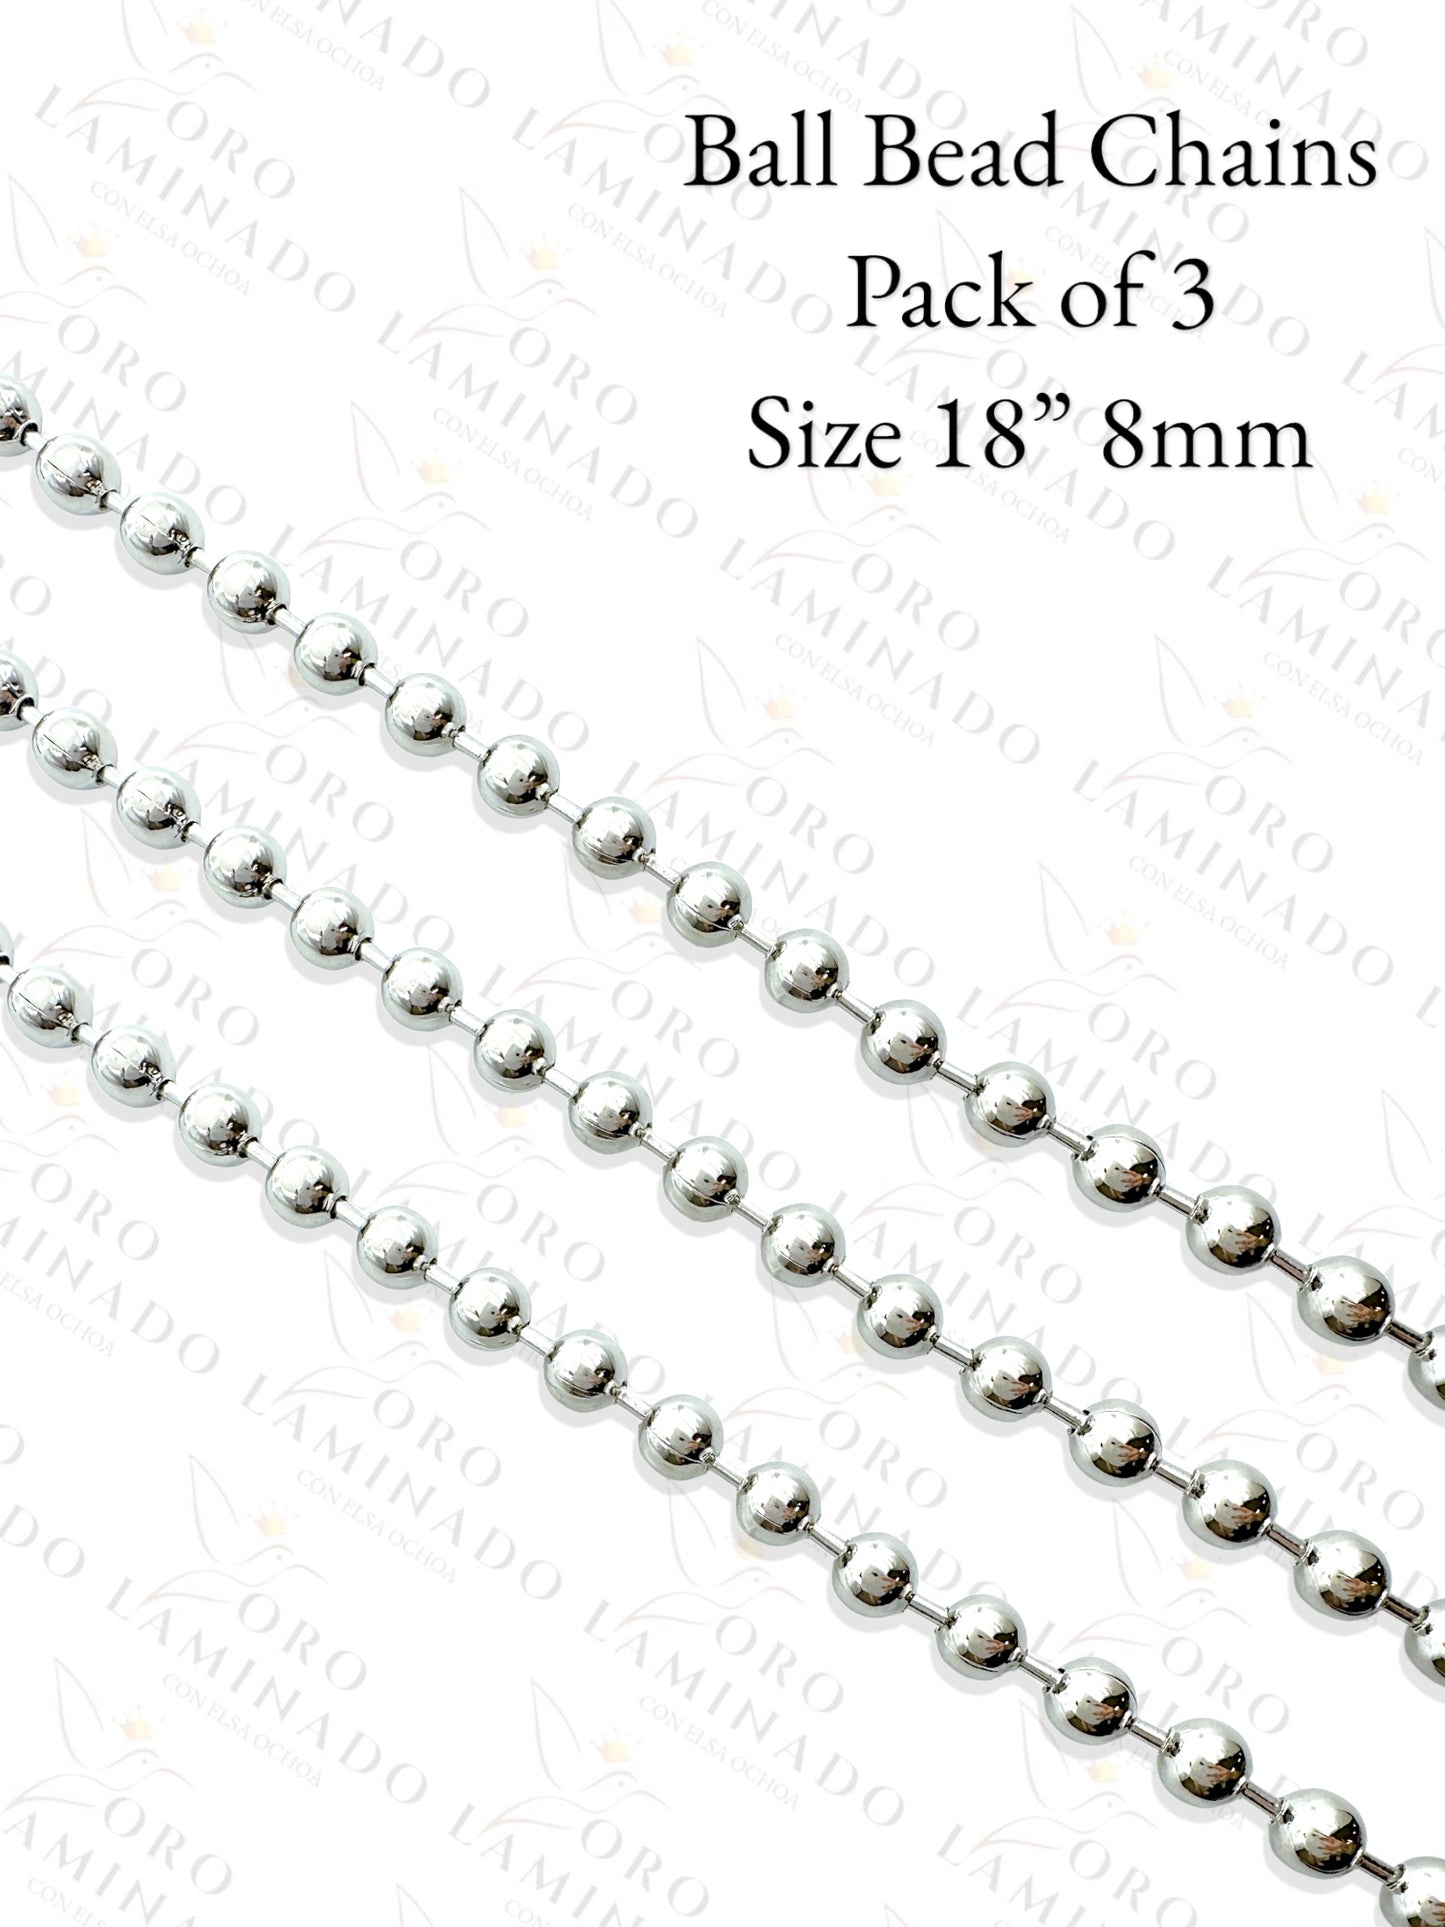 High Quality Silver Ball Bead Chains Pack of 3 Size 18" 8mm C69